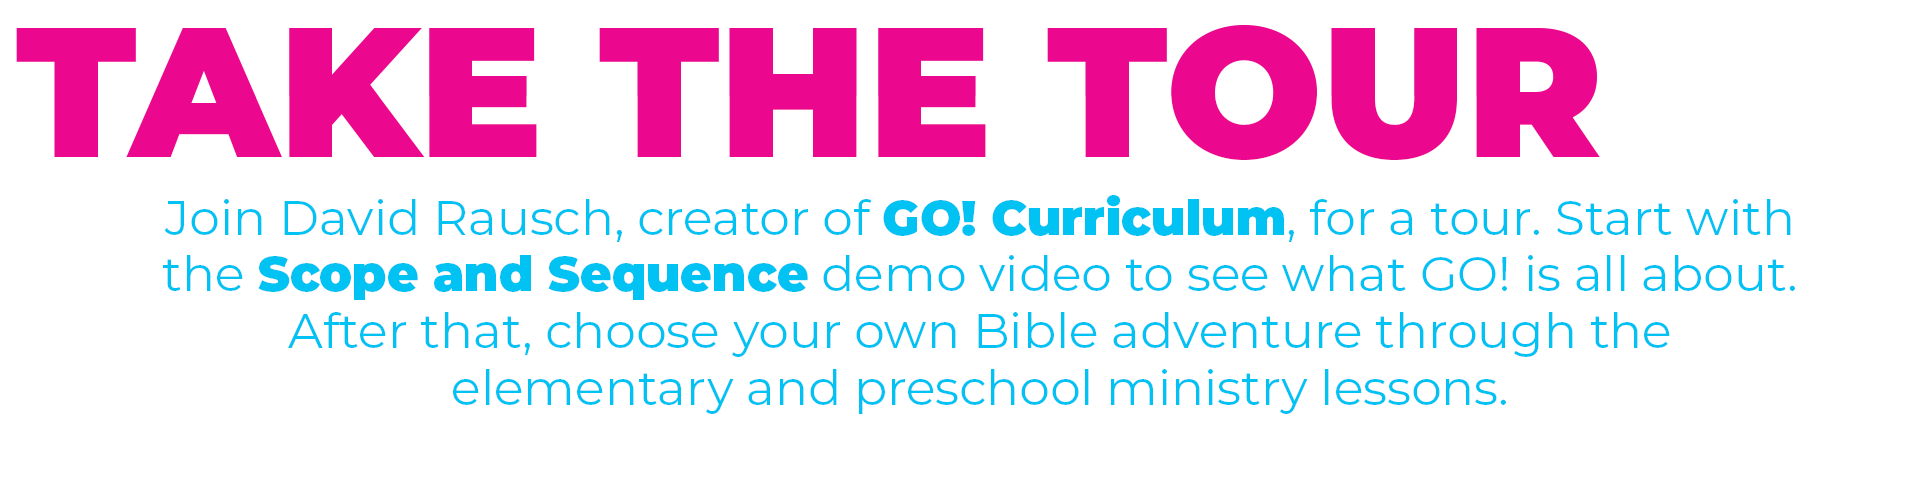 Take the tour of GO! Curriculum. Join David Rausch, creator of GO! curriculum, for a tour. Start with the Scope and Sequence demo video to see what GO! is all about. After that, choose your own Bible adventure through the elementary and preschool ministry lessons.